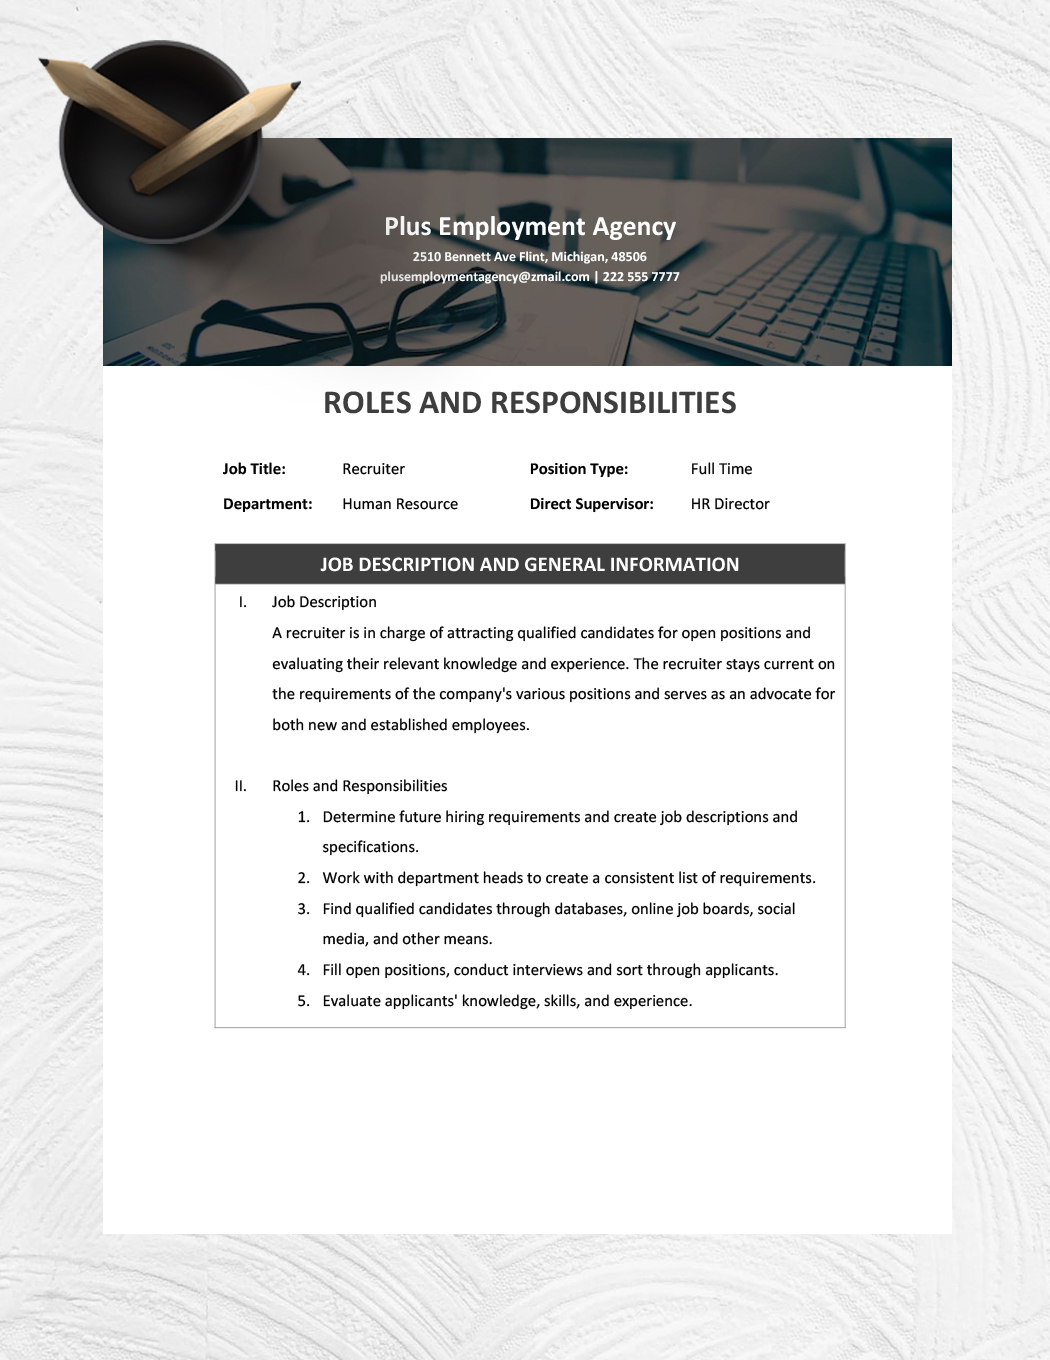 Recruiting Roles And Responsibilities Template